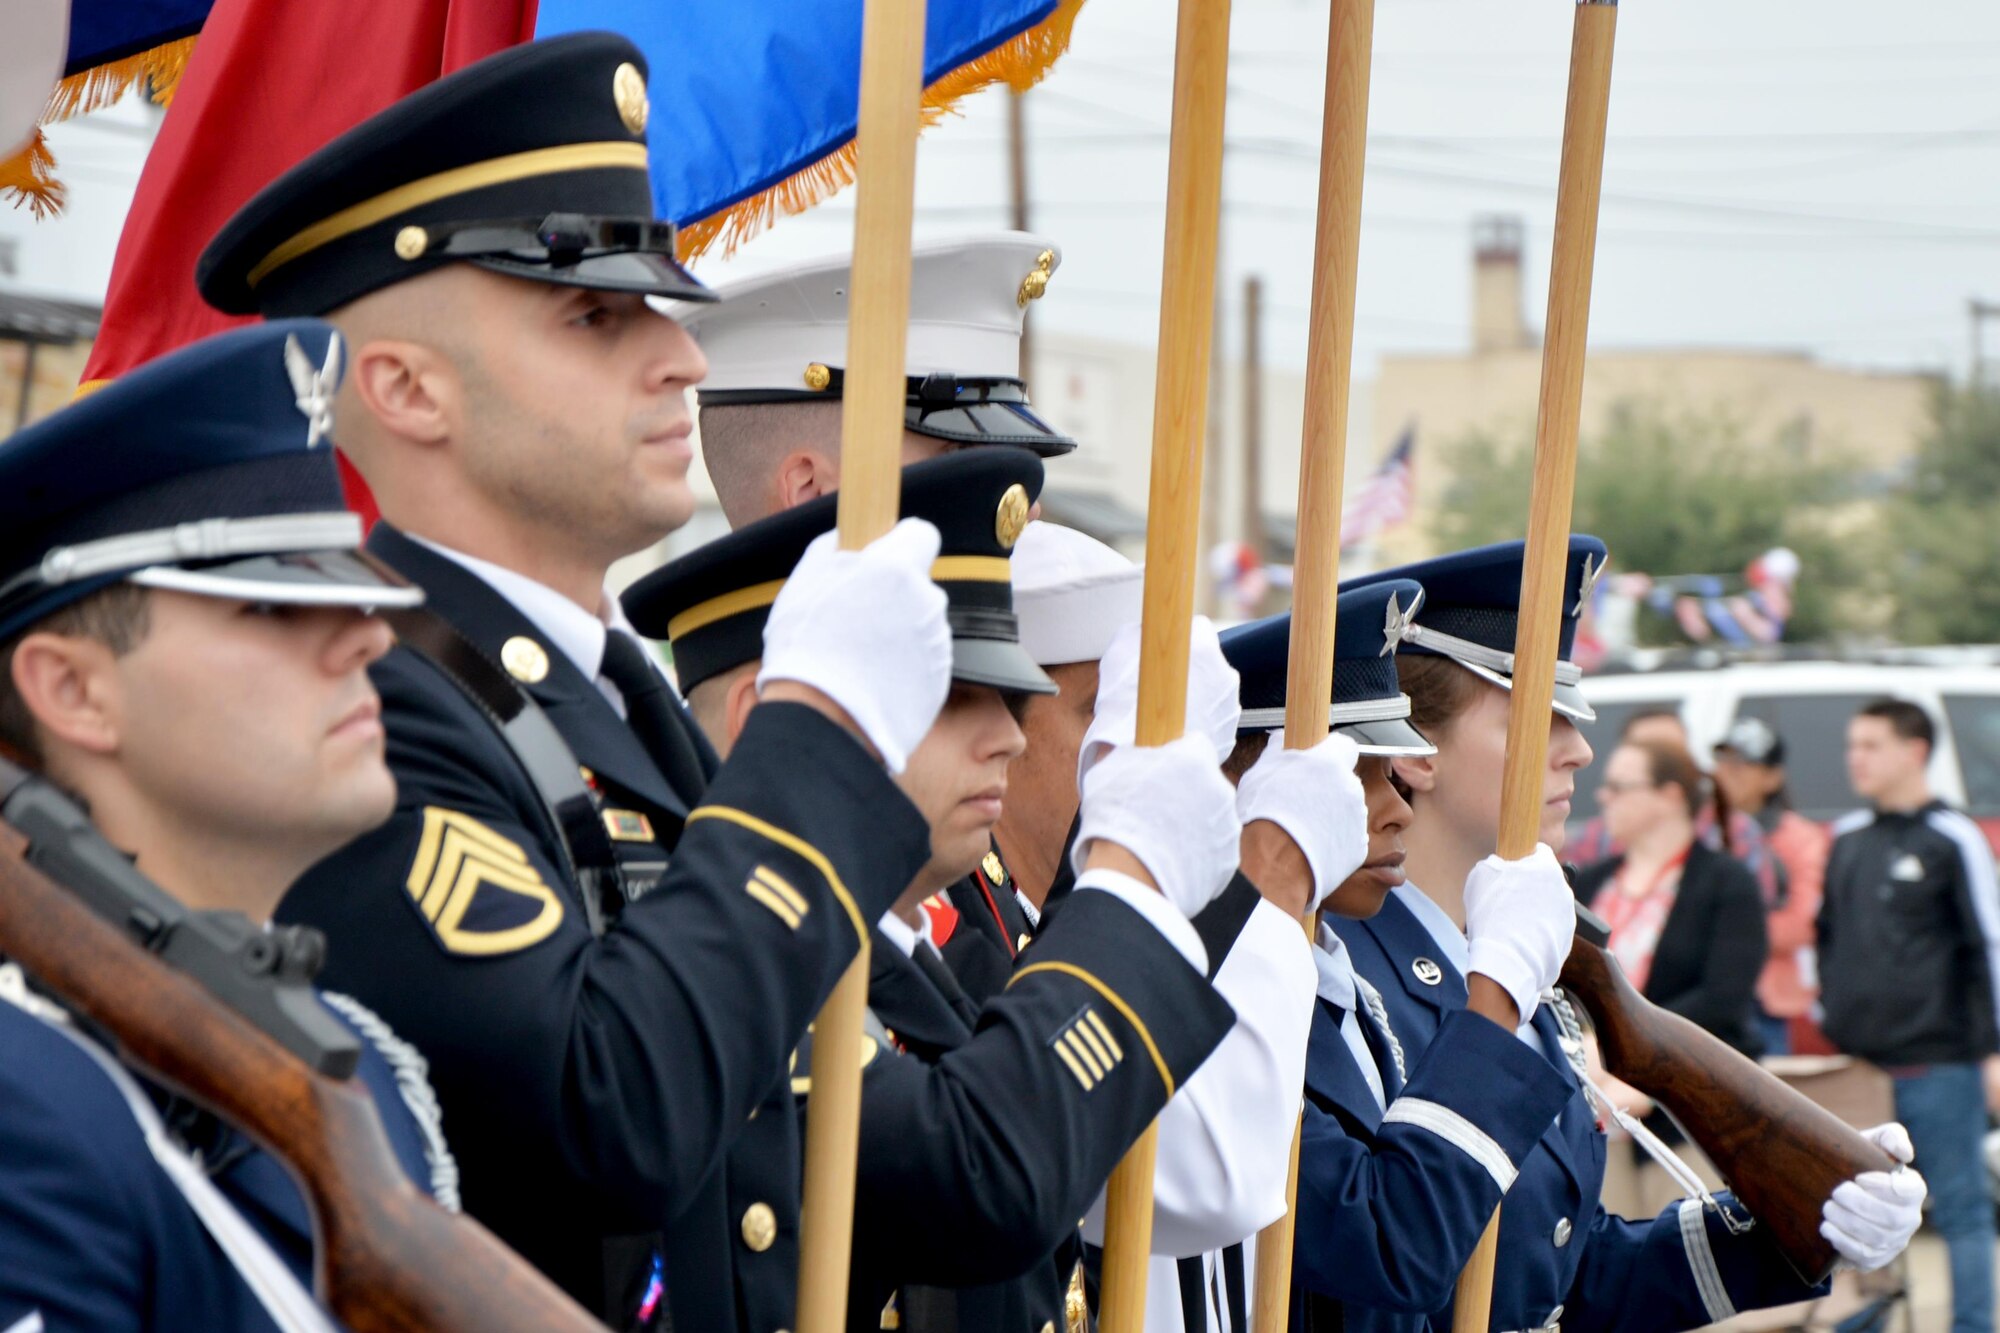 The Goodfellow Air Force Base Joint Service Color Guard marches in the Veterans Day Parade in downtown San Angelo, Texas, Nov. 5, 2016. Service members from the Army, Marine Corps, Navy, Air Force and Coast Guard participated to support the city. (U.S. Air Force photo by Airman 1st Class Randall Moose /Released) 